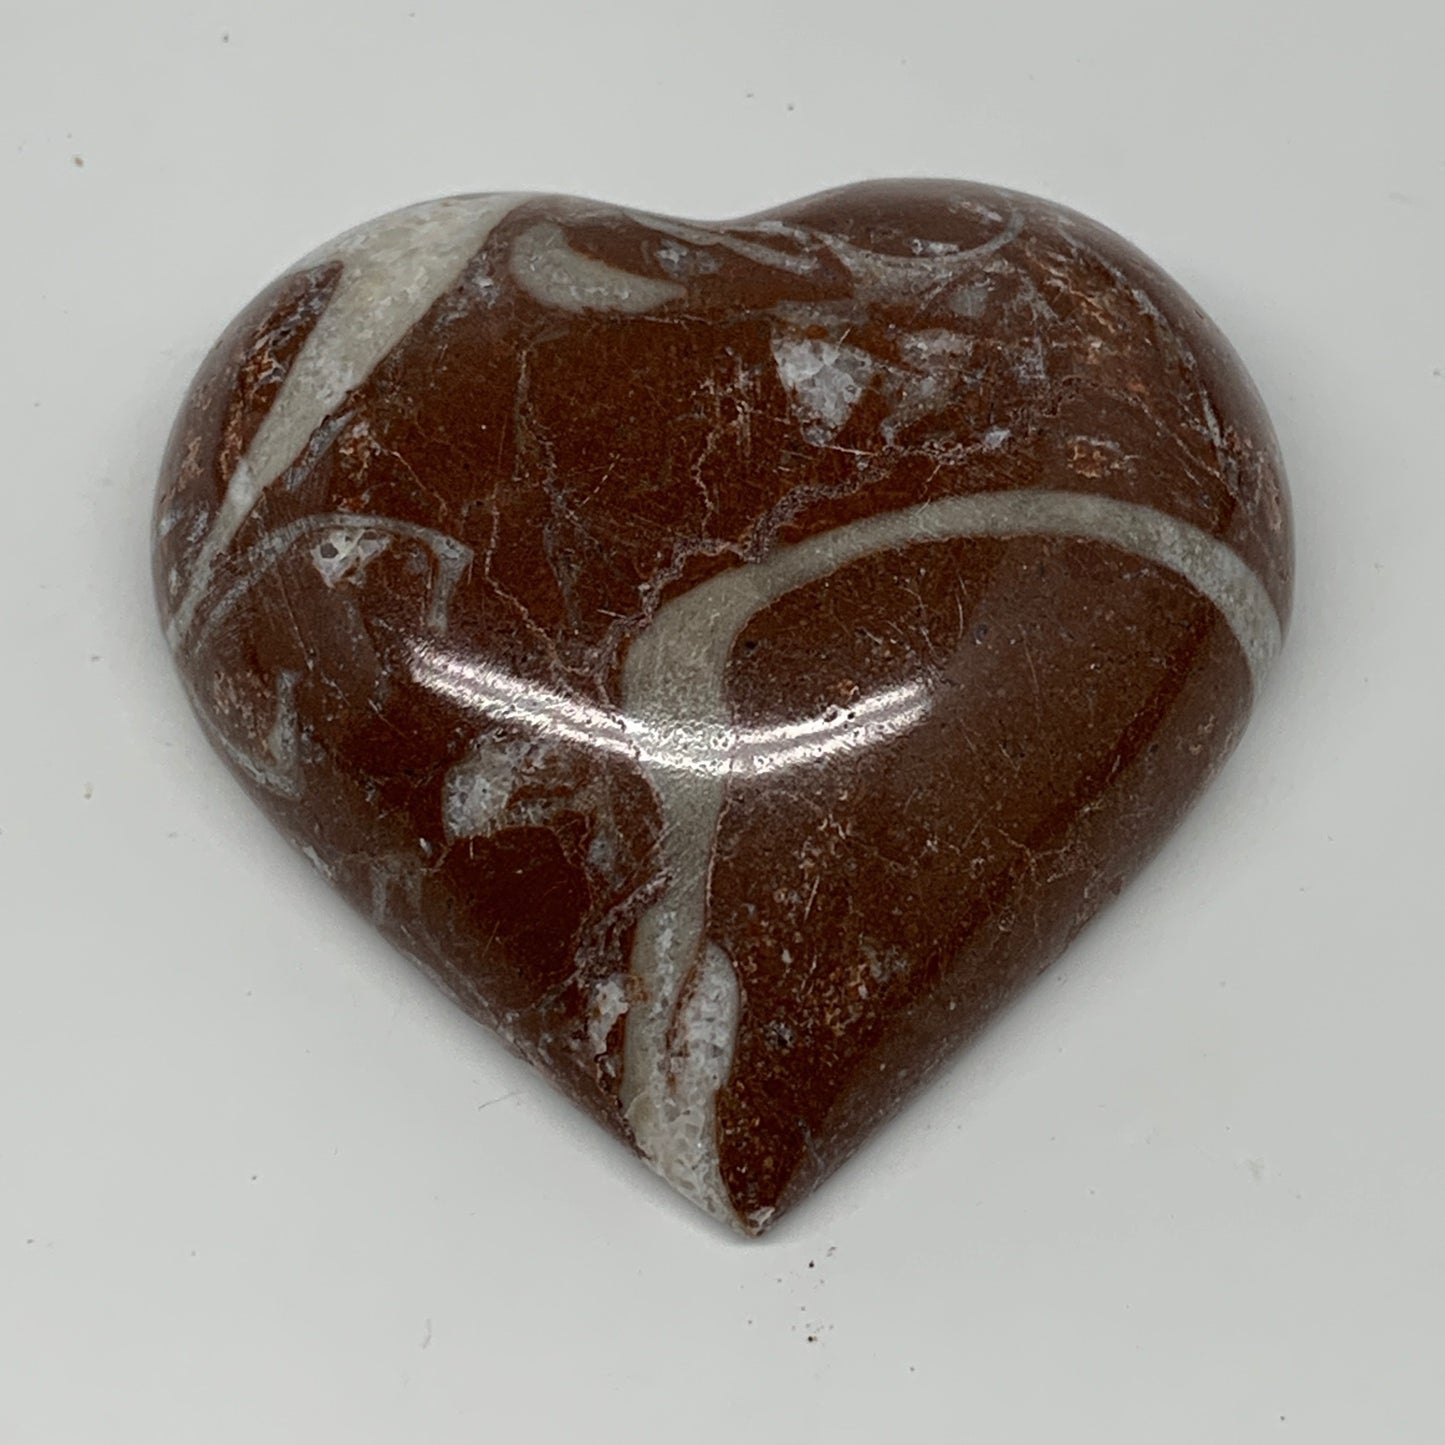 60.2g, 2" x 2.1"x 0.7", Natural Untreated Red Shell Fossils Half Heart @Morocco,